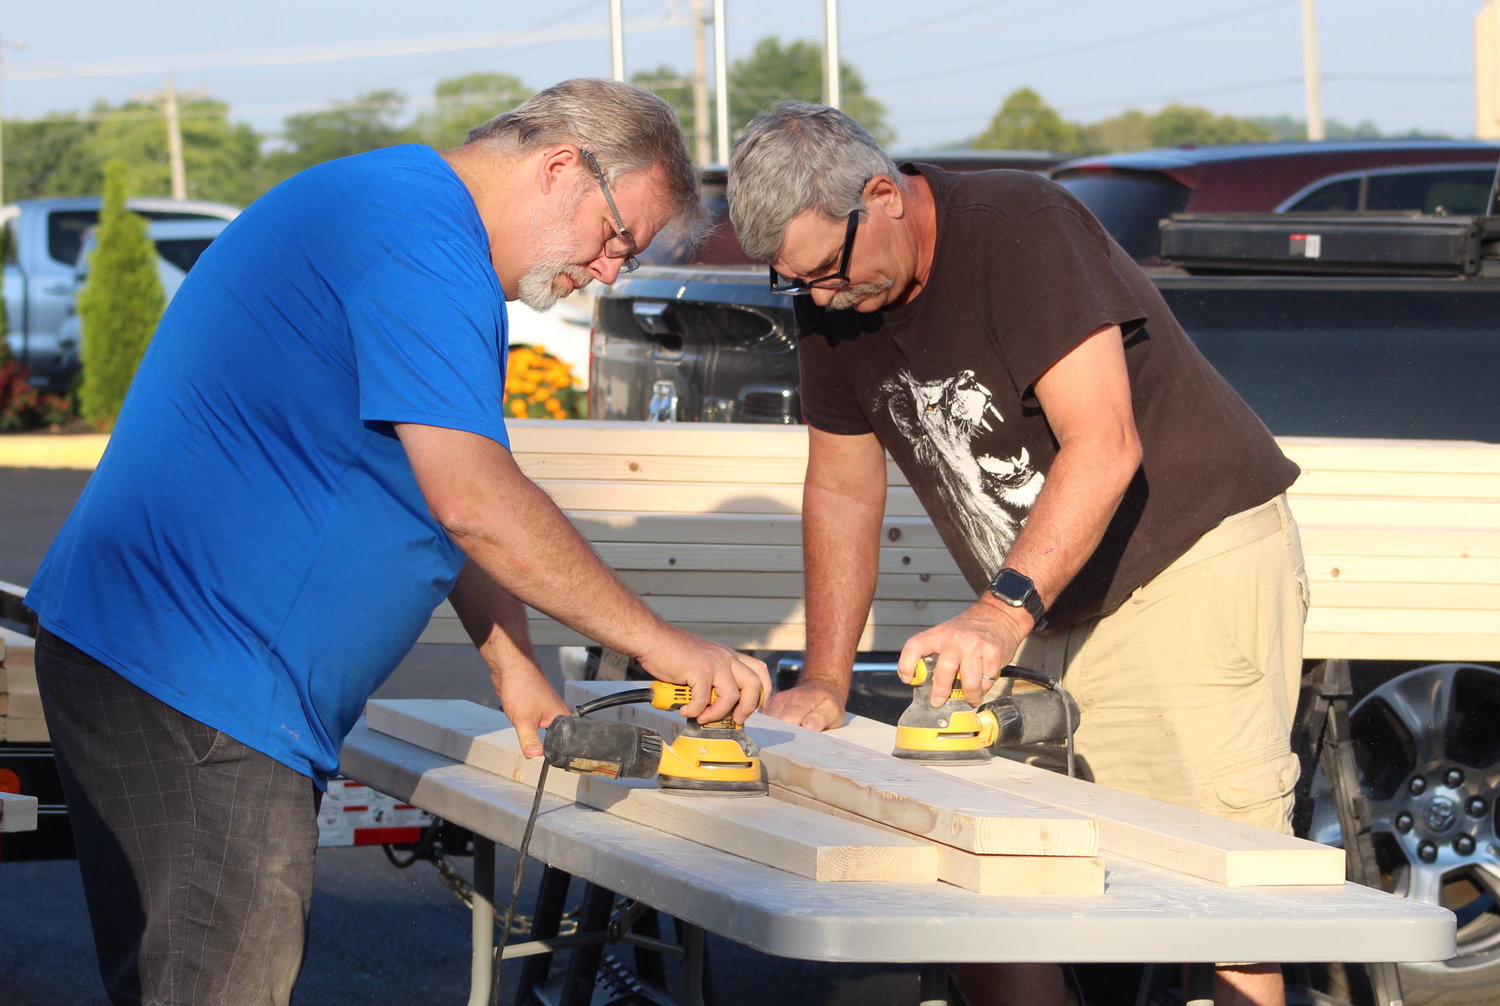 Former Mayor of Marshfield and Community Connections, Robert Williams, is seen with another volunteer sanding boards. Williams shares how he and others got involved with SHP, “ In March of 2021, after hearing about SHP a group of five guys (Alan Balmer, Terry Arndt, Tom Donovan, Carl Gore, and myself) decided to go to San Antonio to train and start a new chapter. Our Core Team is now almost 20 people who are very dedicated to the cause.”